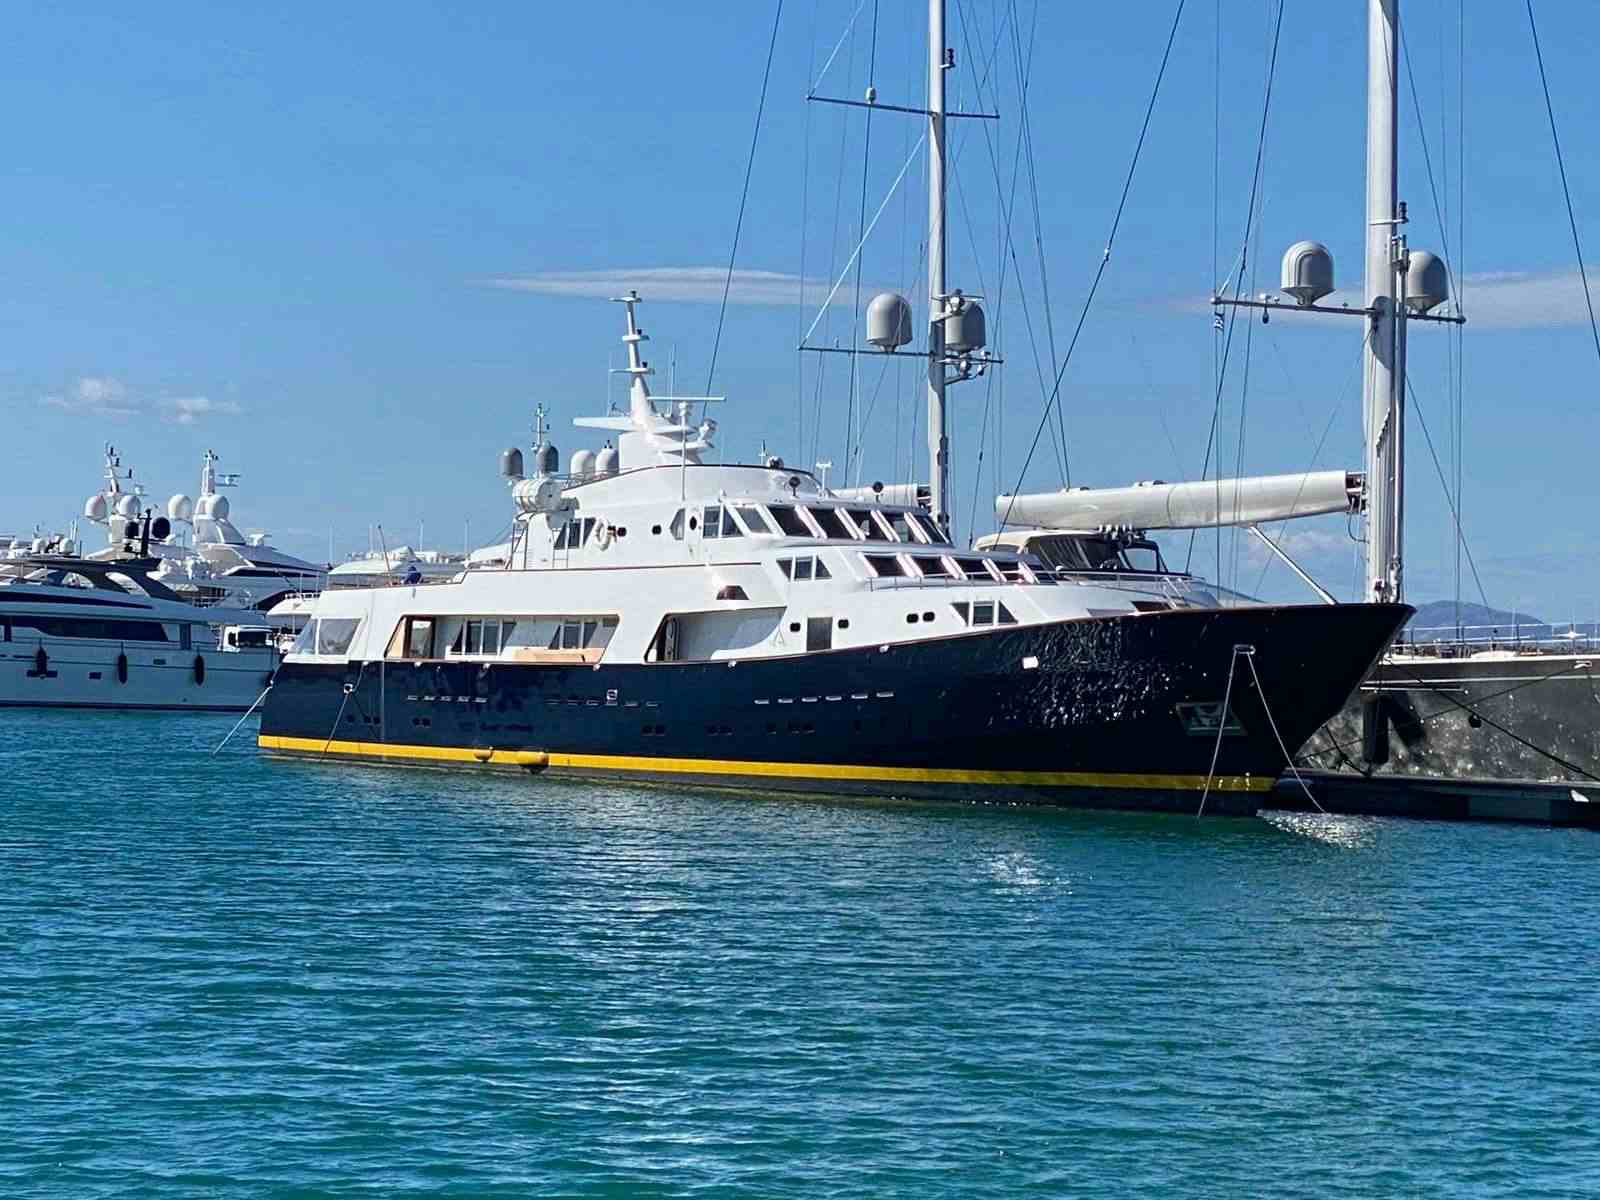 SOMETHING COOL - Yacht Charter Punta Ala & Boat hire in Summer: W. Med -Naples/Sicily, Greece, W. Med -Riviera/Cors/Sard., Turkey, W. Med - Spain/Balearics, Croatia | Winter: Indian Ocean and SE Asia, Red Sea, United Arab Emirates 1